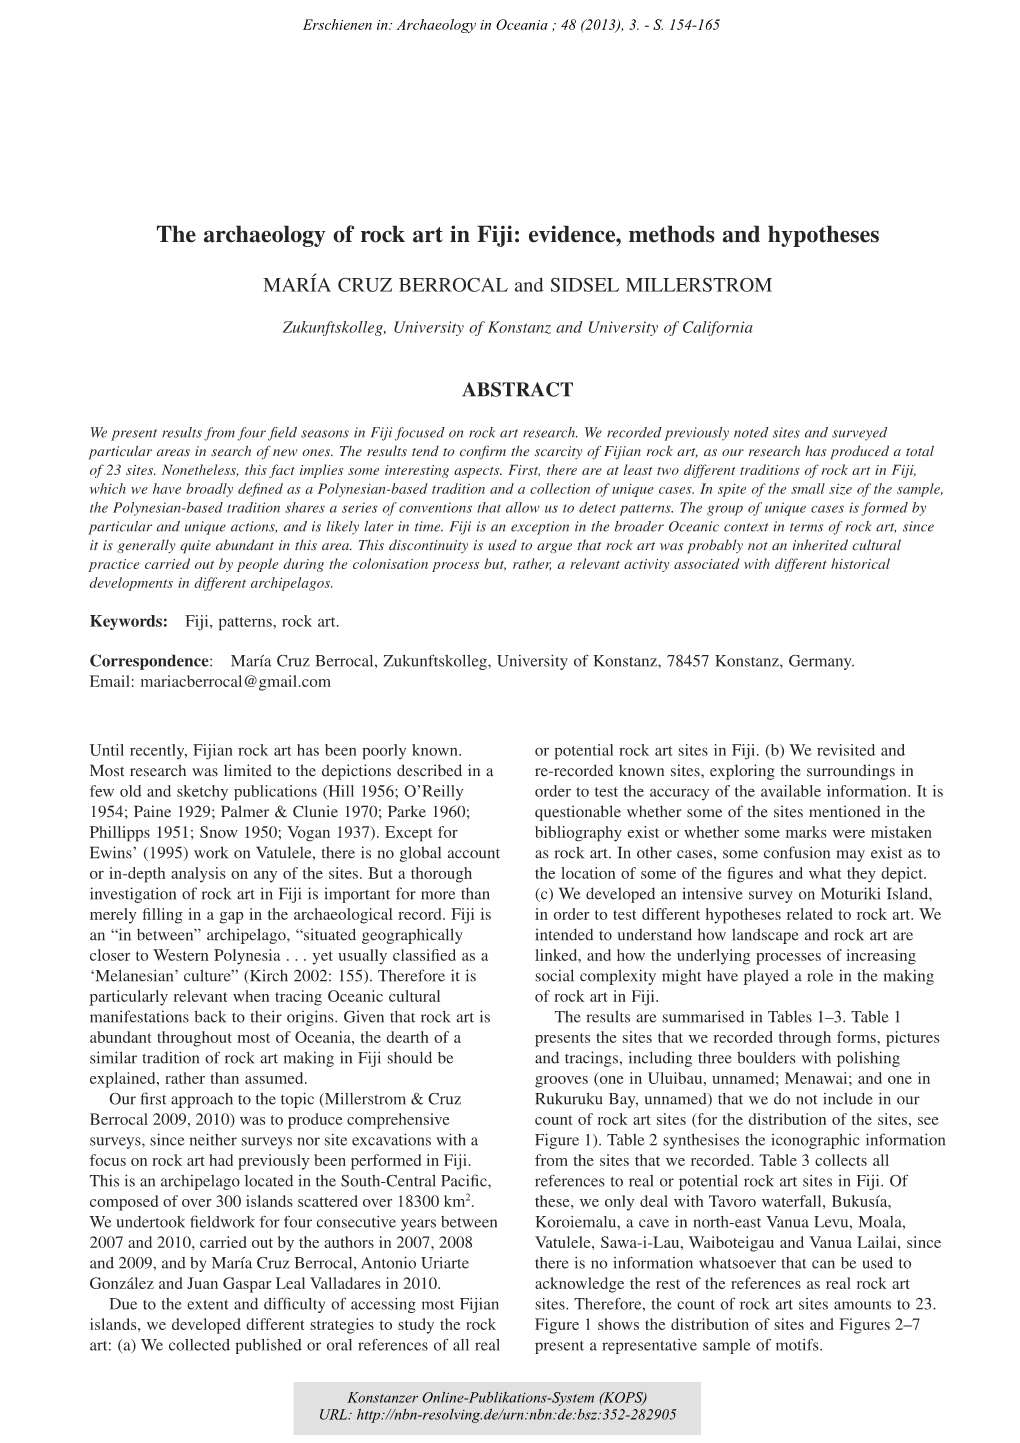 The Archaeology of Rock Art in Fiji : Evidence, Methods and Hypotheses